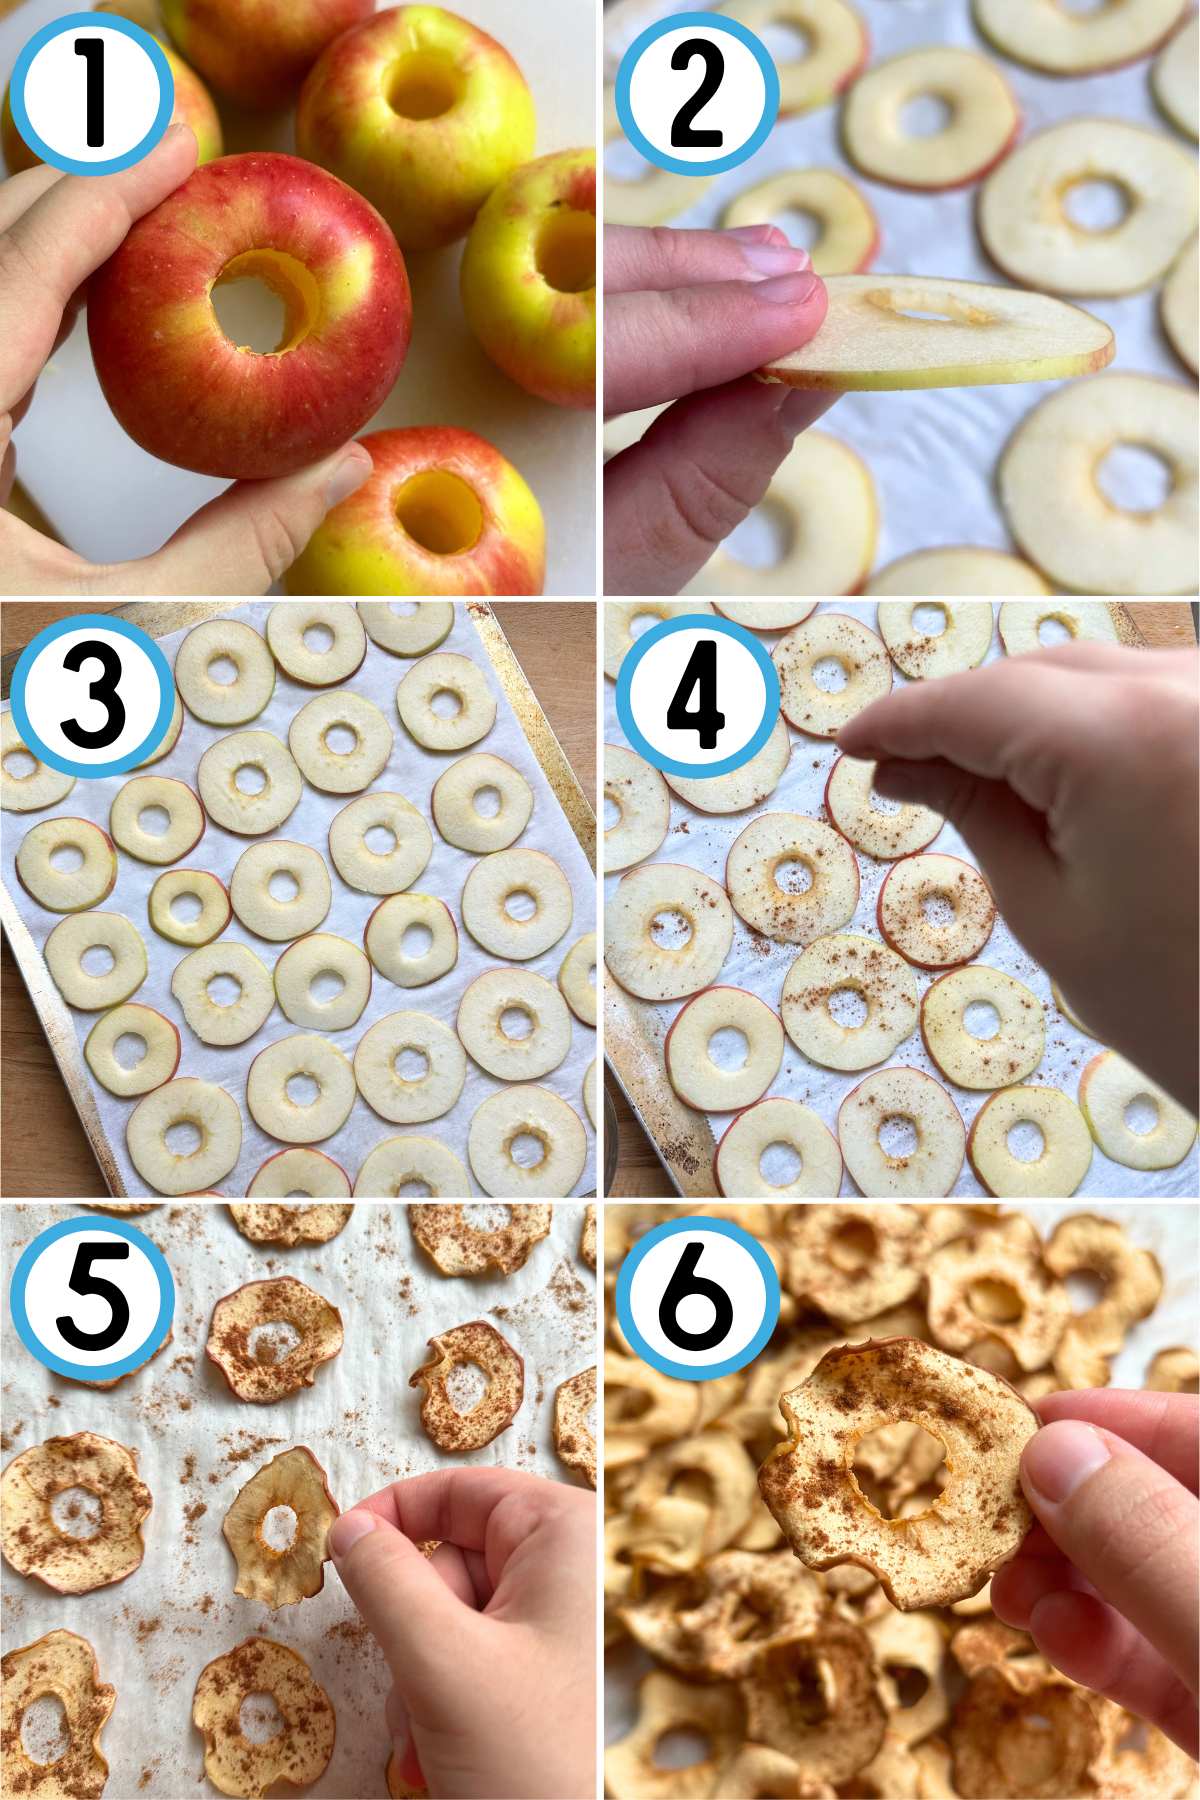 Step by step guide to dehydrating apples in the oven. 1. Core apples. 2. Slice apples into ⅛ inch thick slices. 3. Lay slices in an even layer. 4. Sprinkle cinnamon on top. 5. Flip after 90 minutes of baking. 6. Remove from oven after another 30 minutes and let cool on baking sheet until crispy.